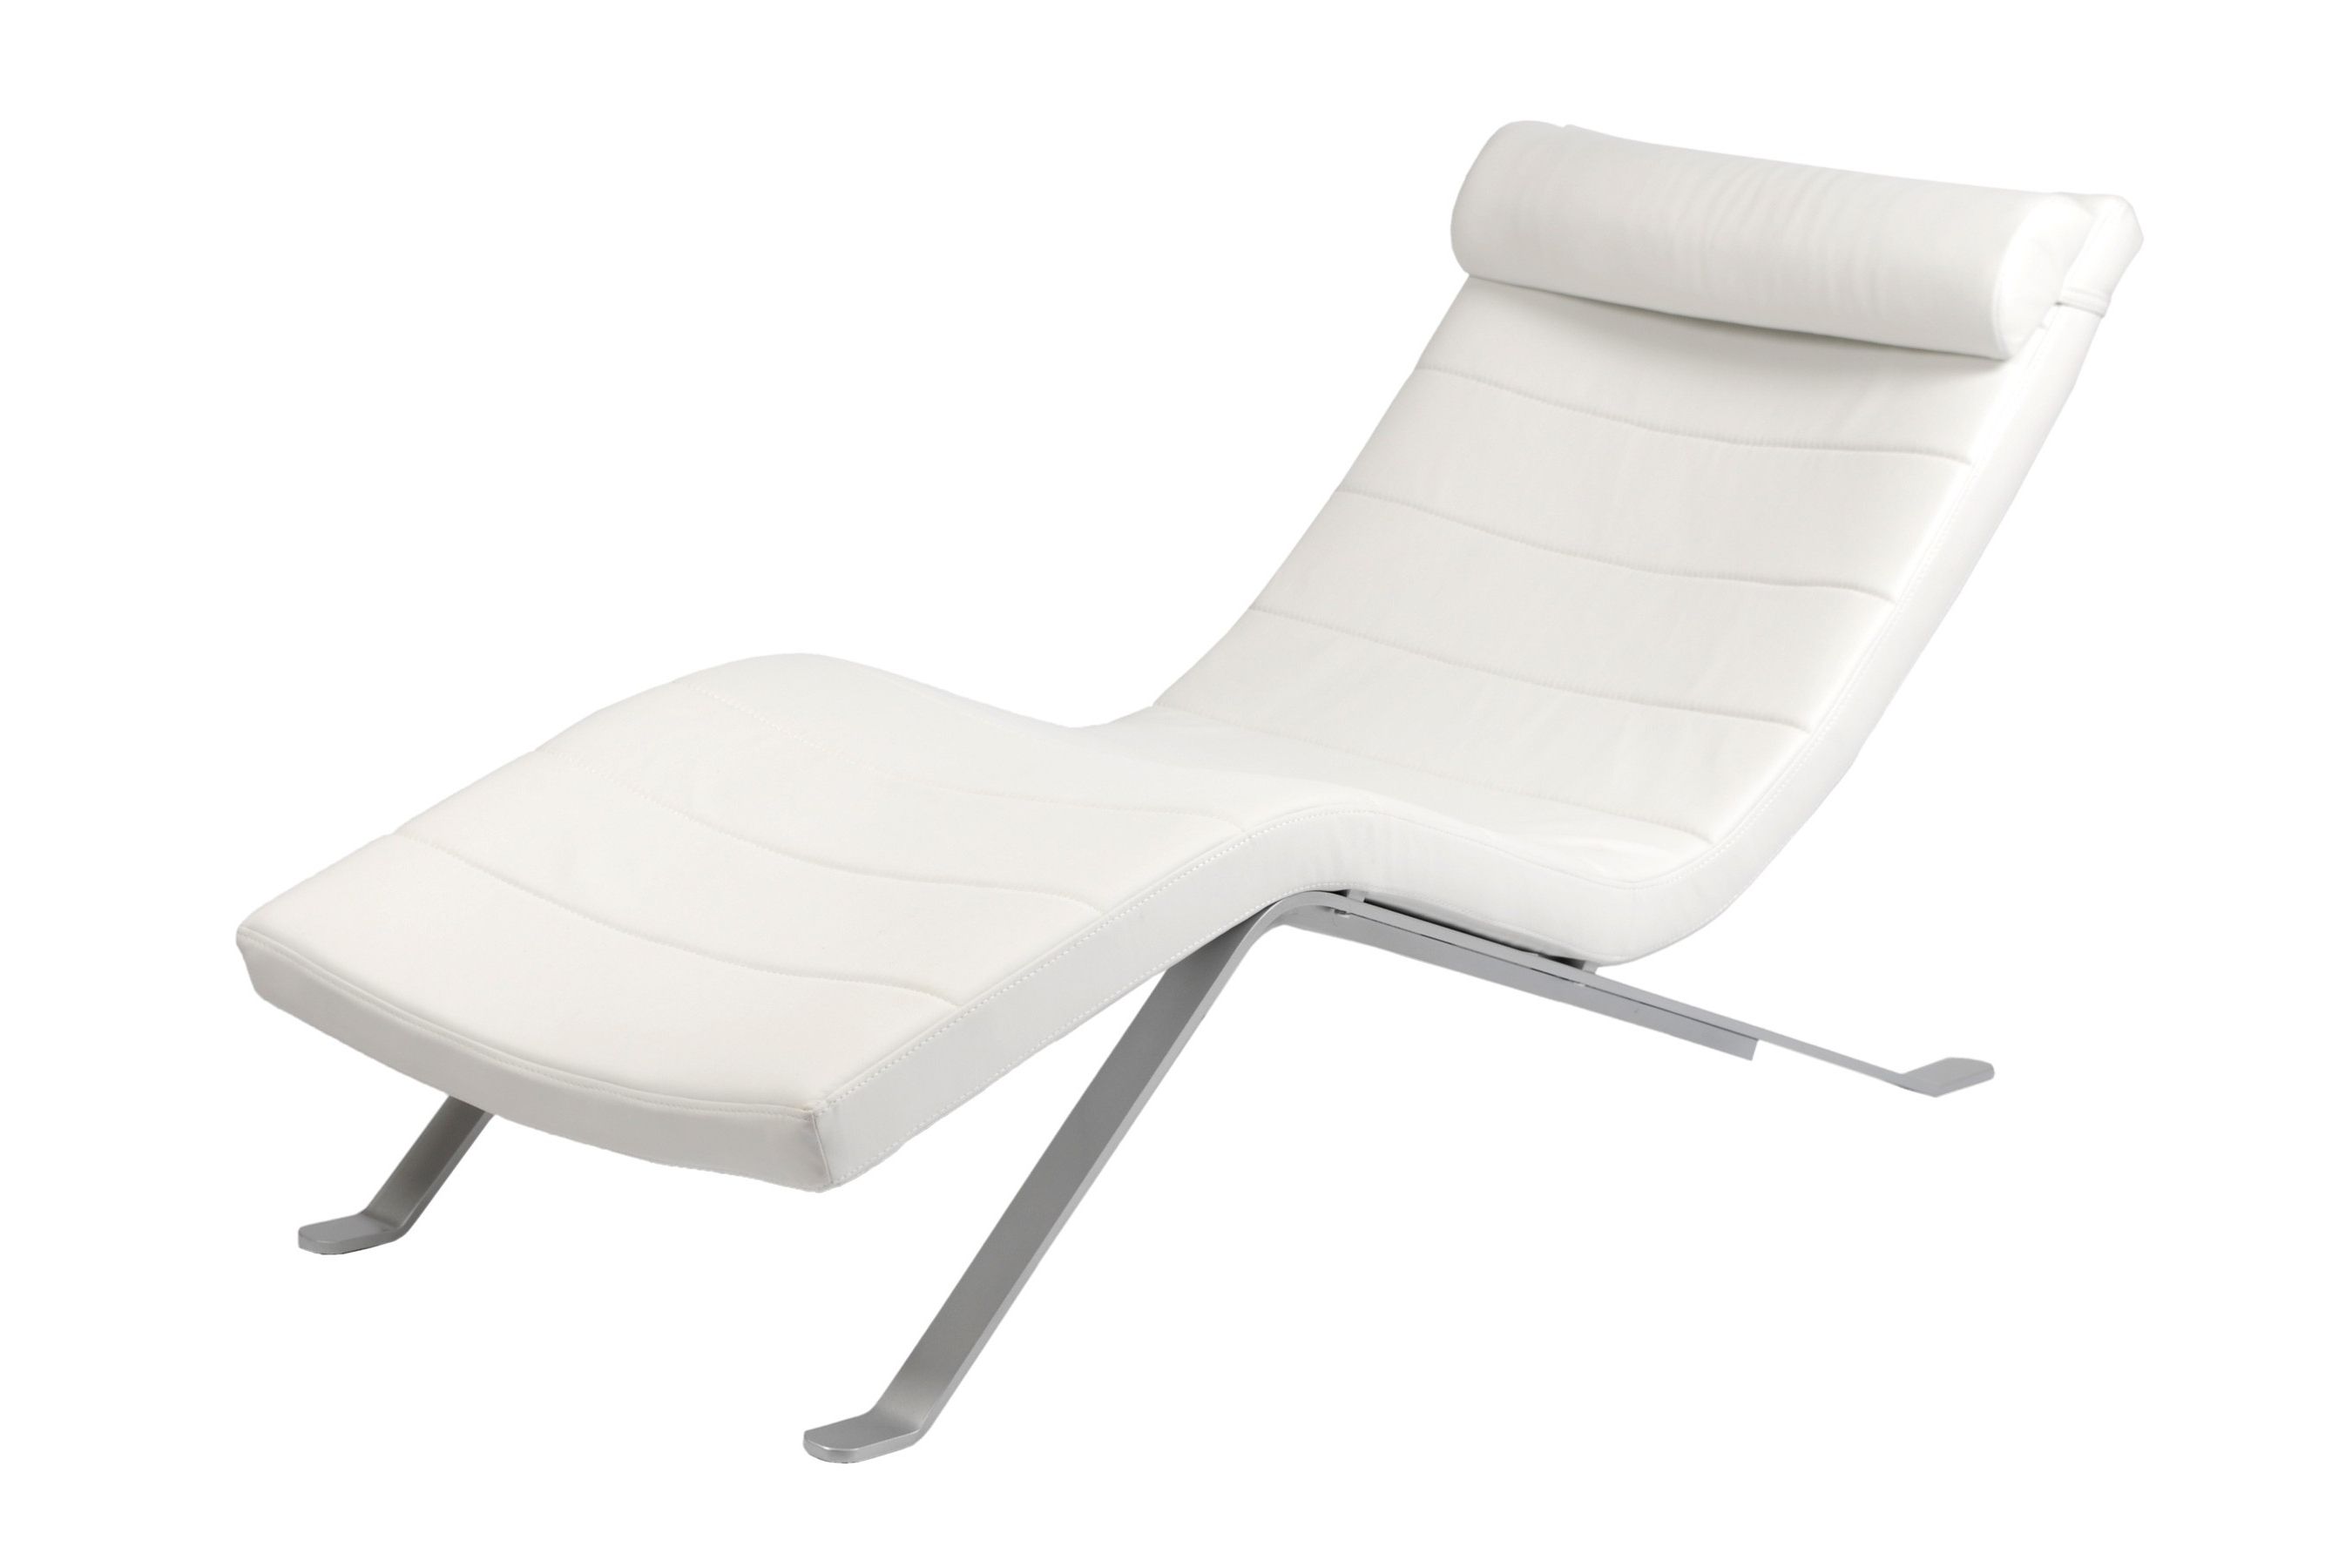 White Chaise Lounge Chairs Throughout Popular Convertible Chair : Outdoor Chaise Lounge Chairs Lounge White (View 10 of 15)